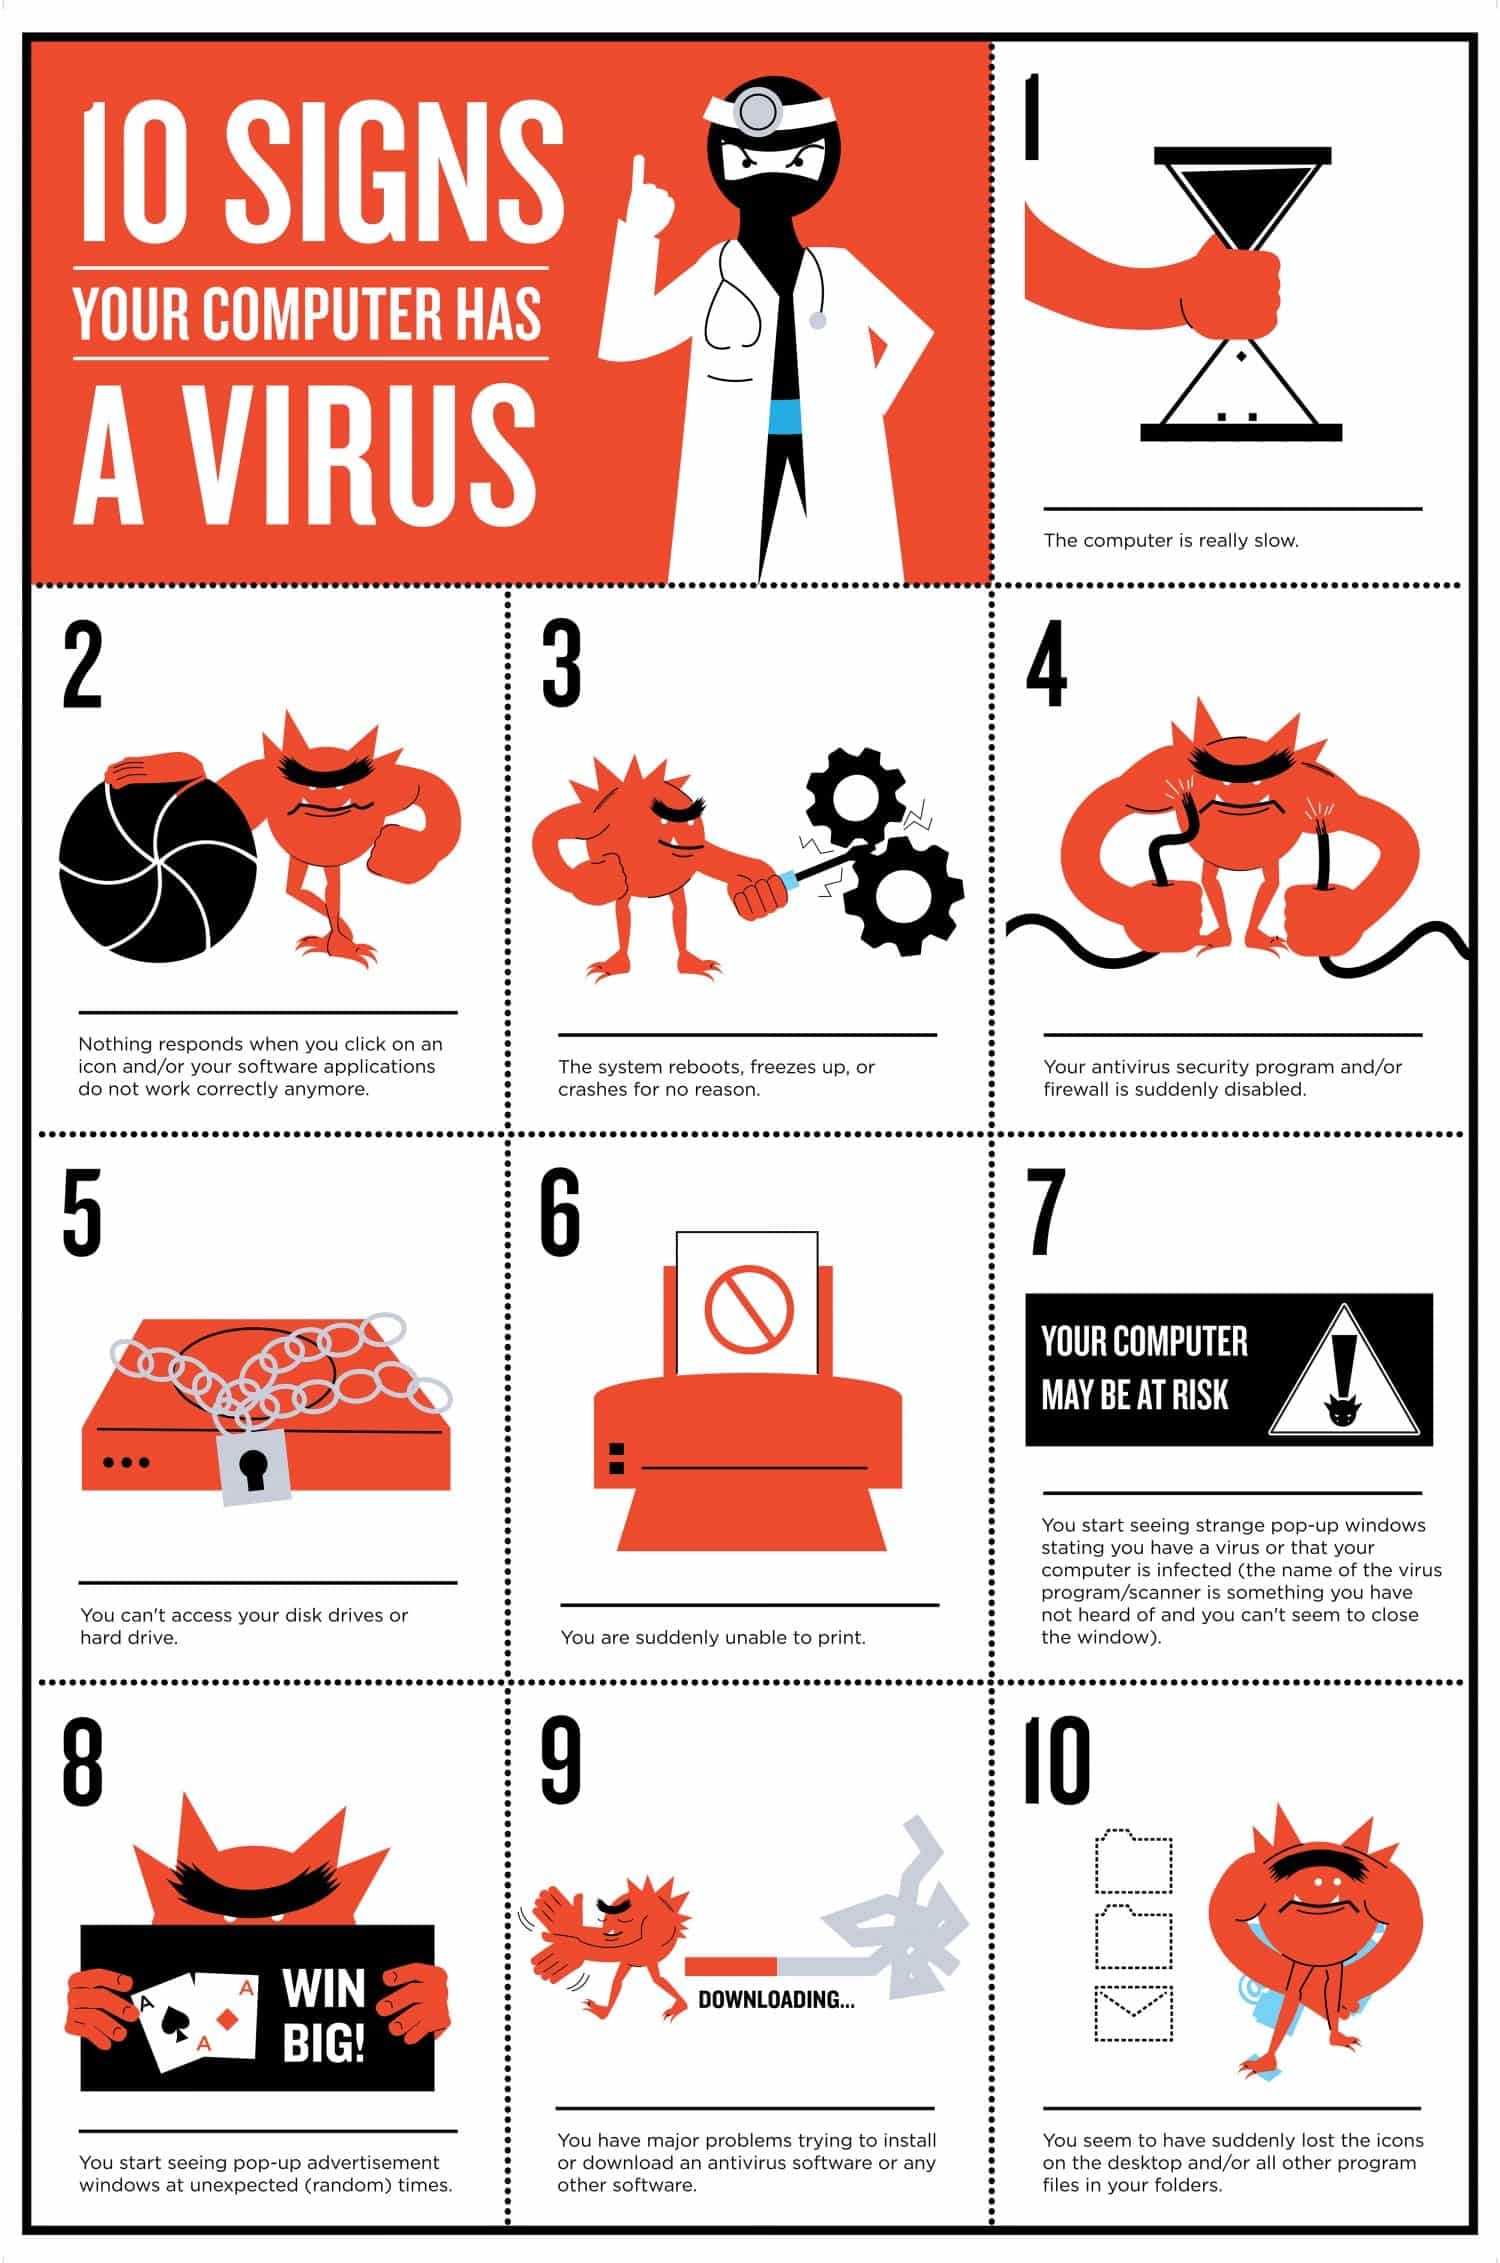 10 Signs your Window Computer has a Virus